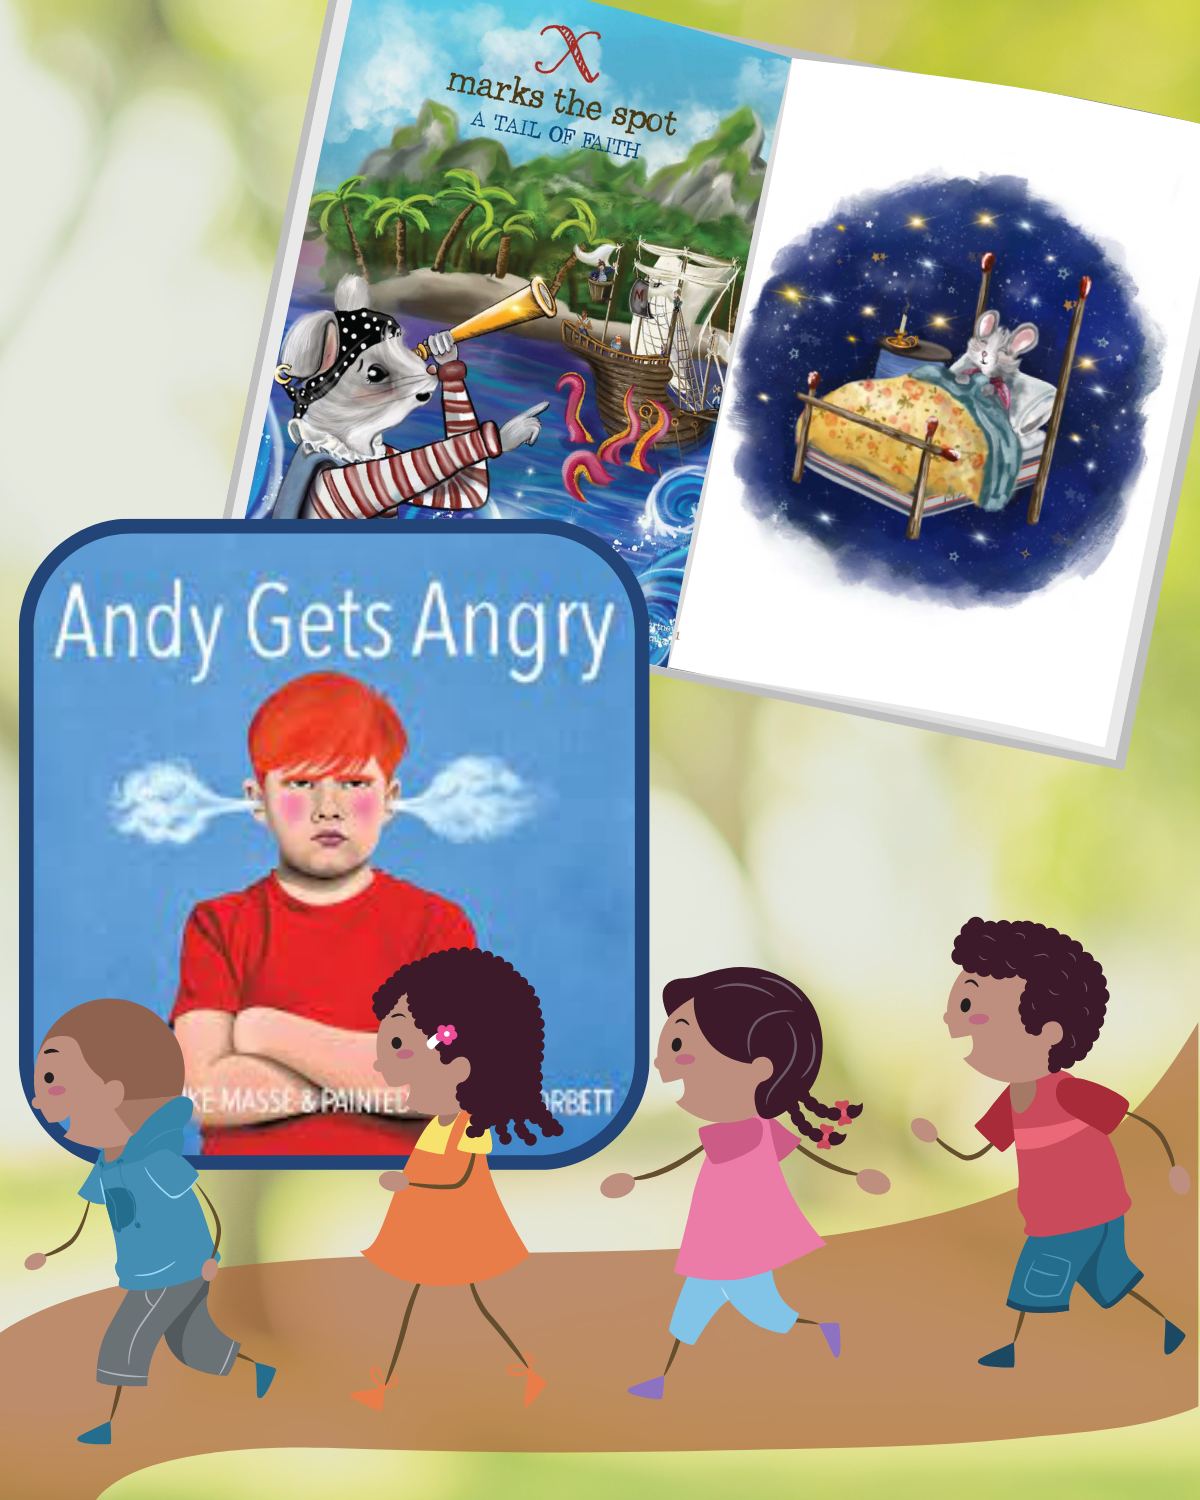 Graphic has four children walking on a path and has the book covers for "Andy Gets Angry" and "X Marks the Spot: A Tail of Faith" above them